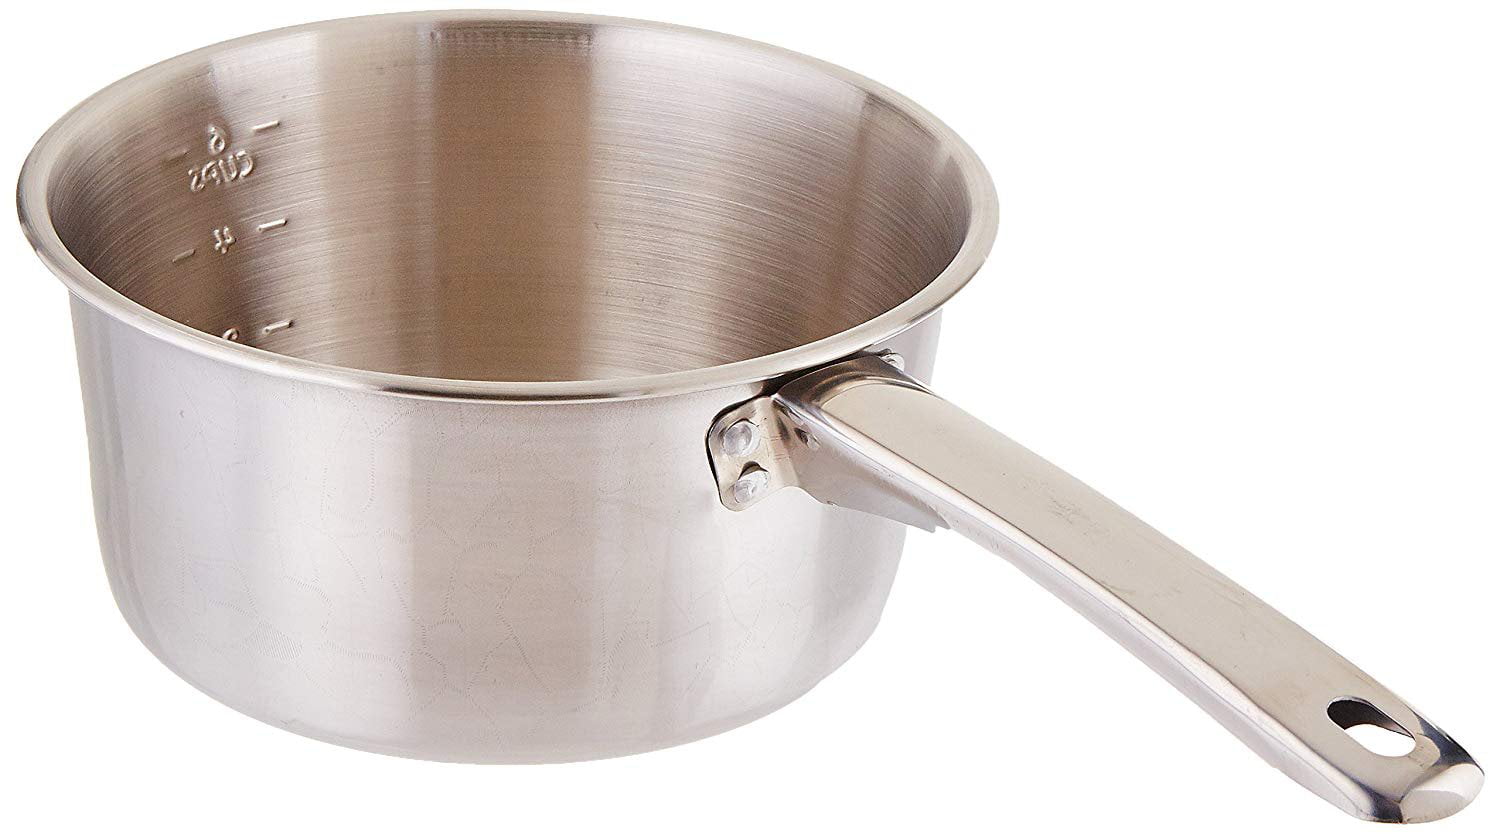 Aluminum Pot with Lid Winco 14" x 10-1/4" Sauce Pot with Cover 